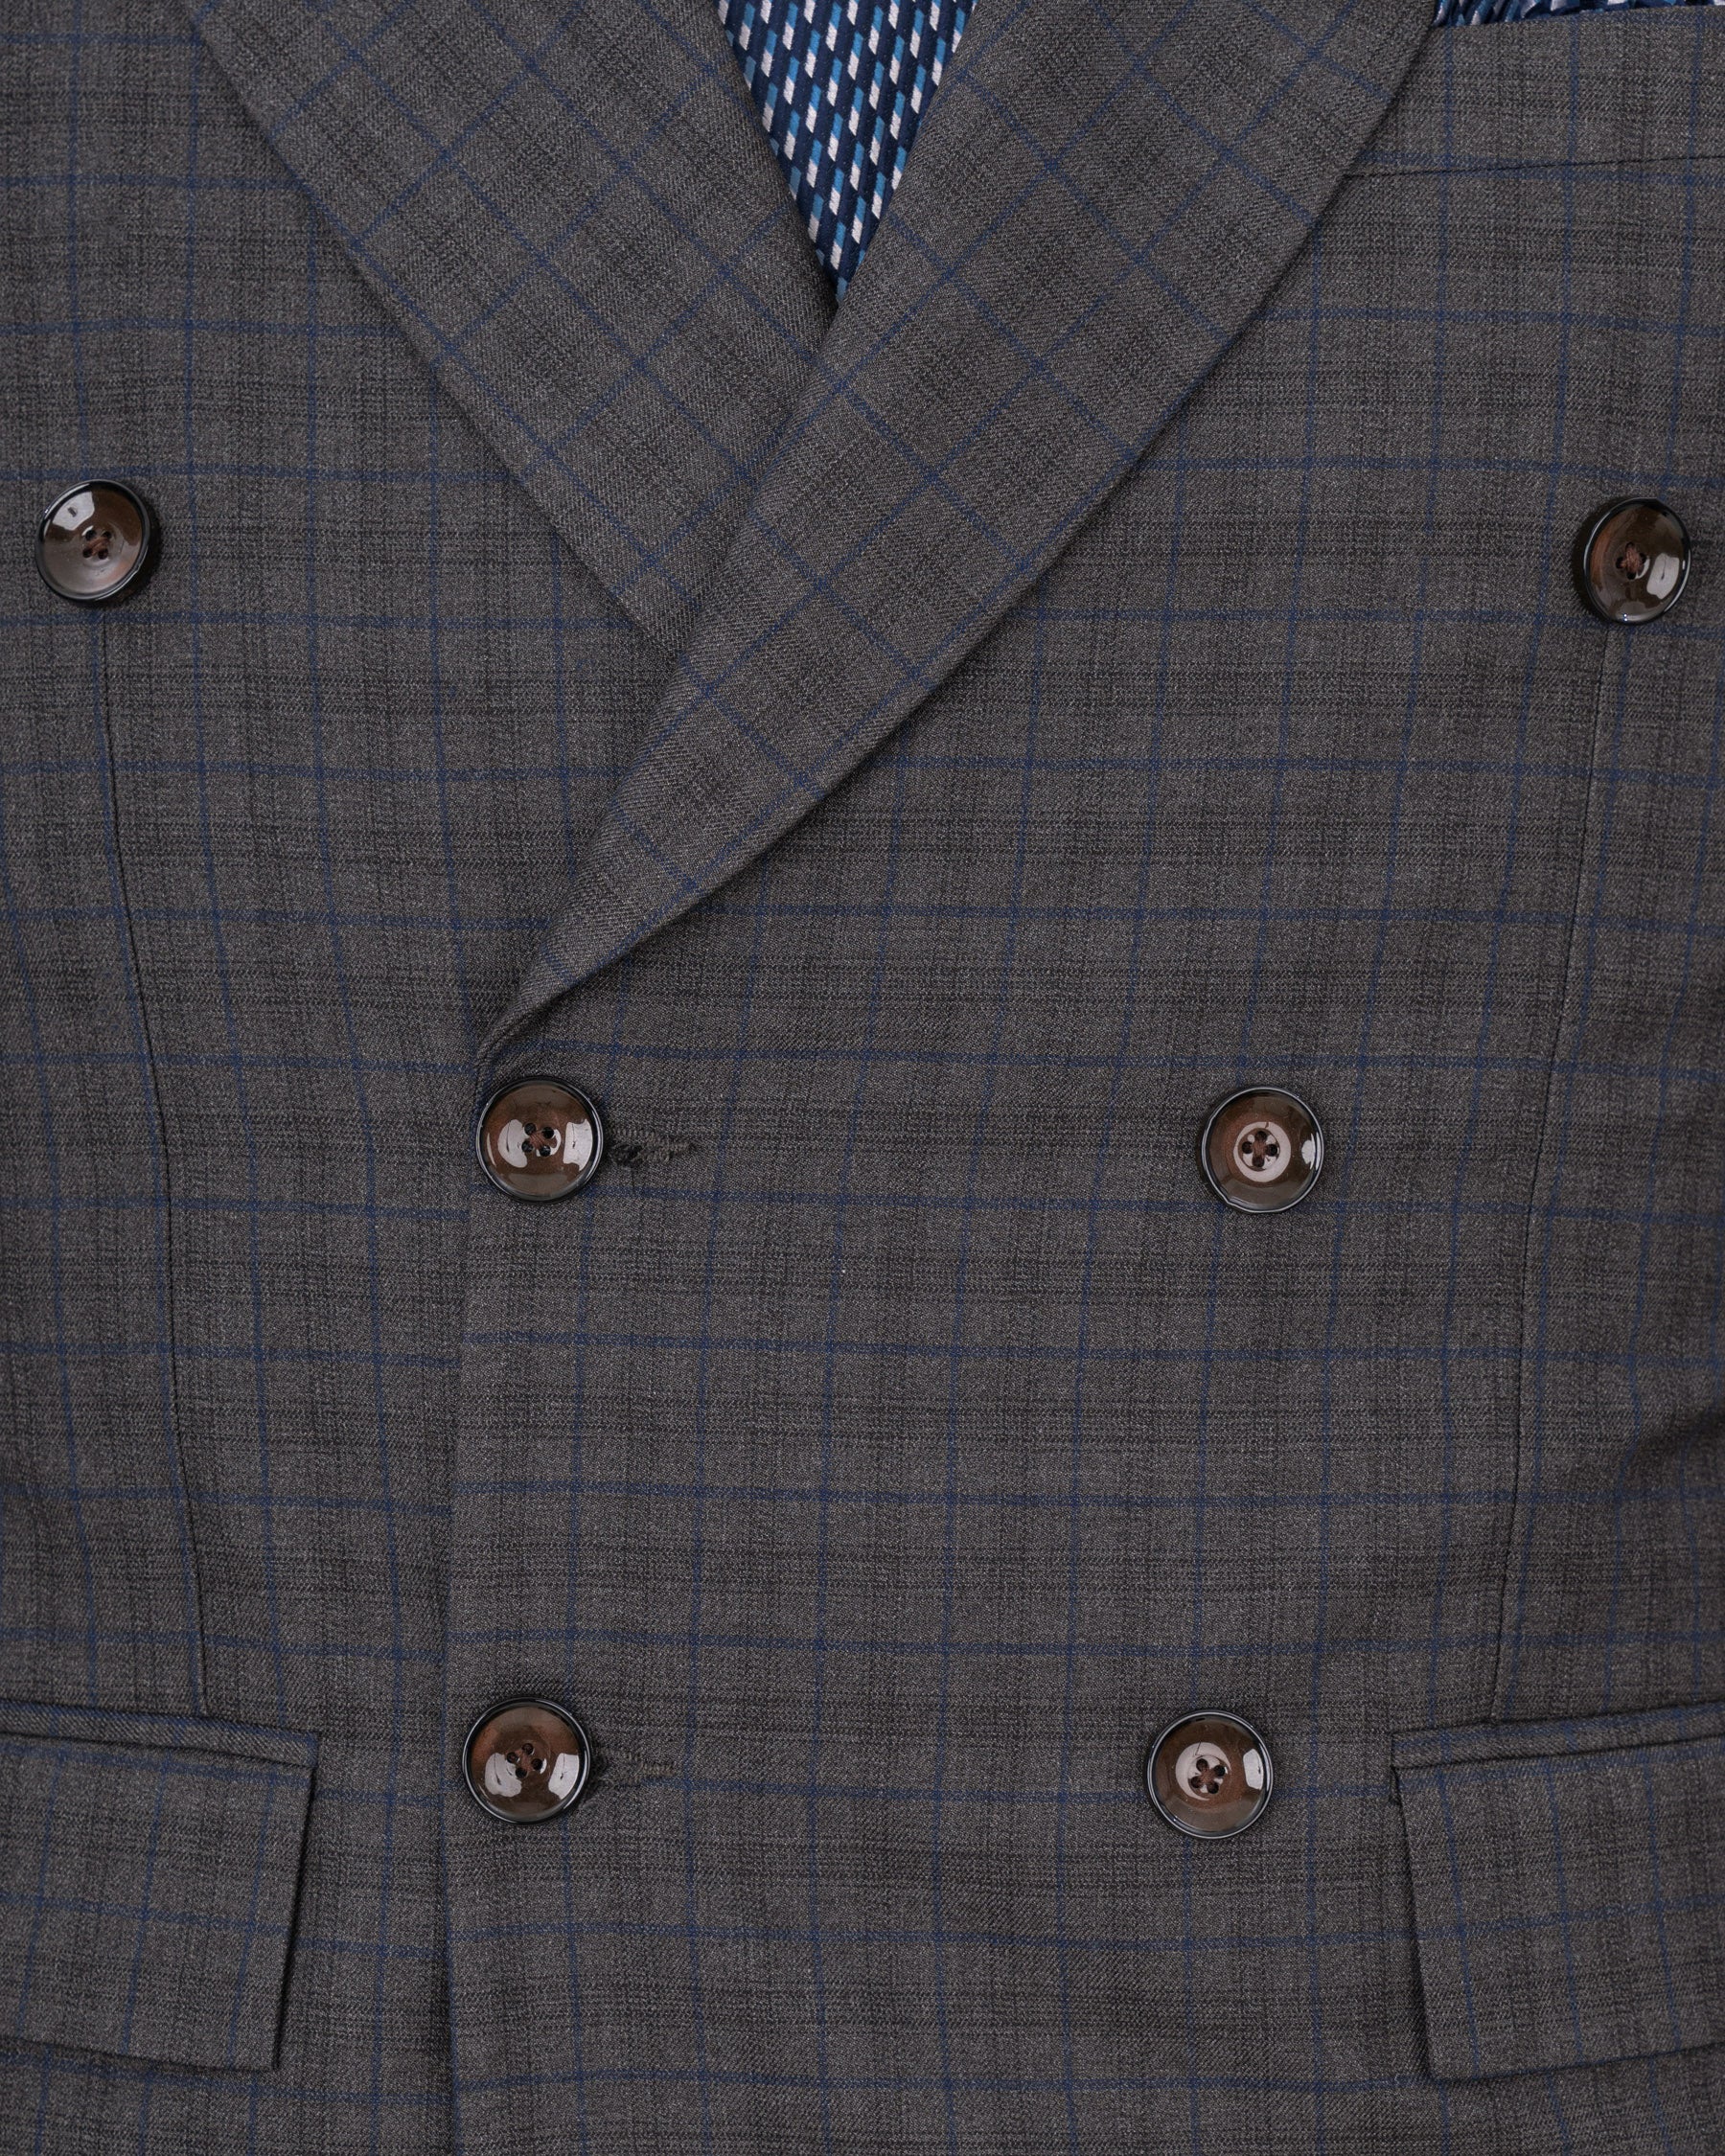 Tundora Gray Plaid Double Breasted Suit ST1724-DB-36, ST1724-DB-38, ST1724-DB-40, ST1724-DB-42, ST1724-DB-44, ST1724-DB-46, ST1724-DB-48, ST1724-DB-50, ST1724-DB-52, ST1724-DB-54, ST1724-DB-56, ST1724-DB-58, ST1724-DB-60 